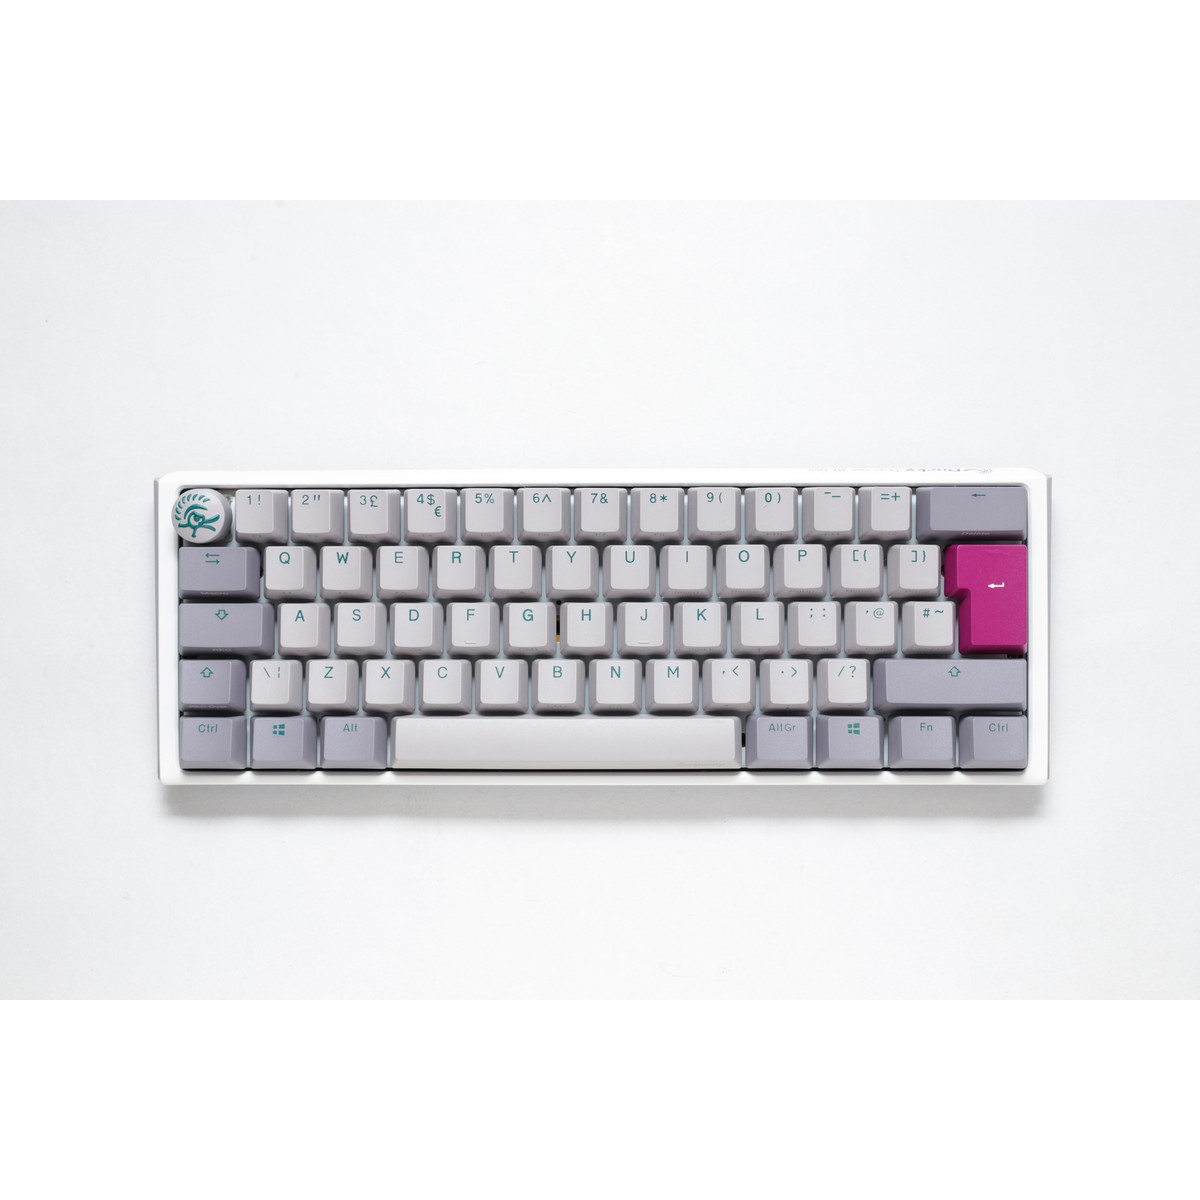 Ducky - Ducky One 3 Mist Mini 60% USB RGB Mechanical Gaming Keyboard Cherry MX Silent Red Switch - UK Layout